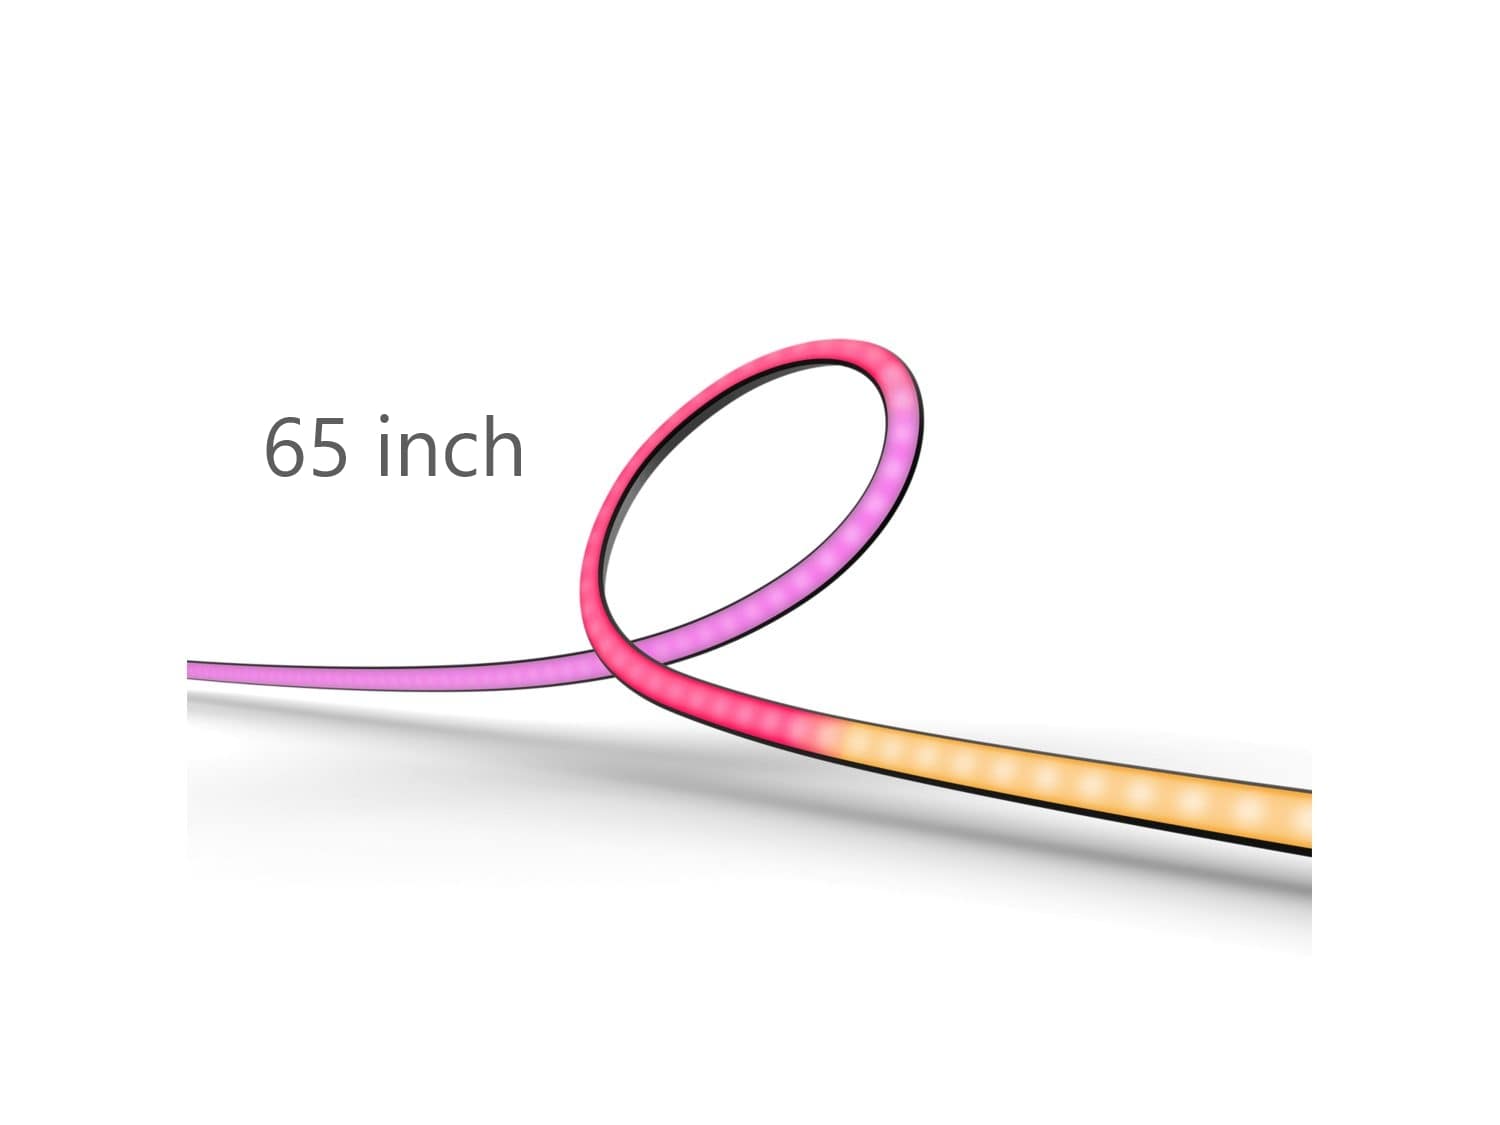 Philips Play Gradient Lightstrip 65 inch featured